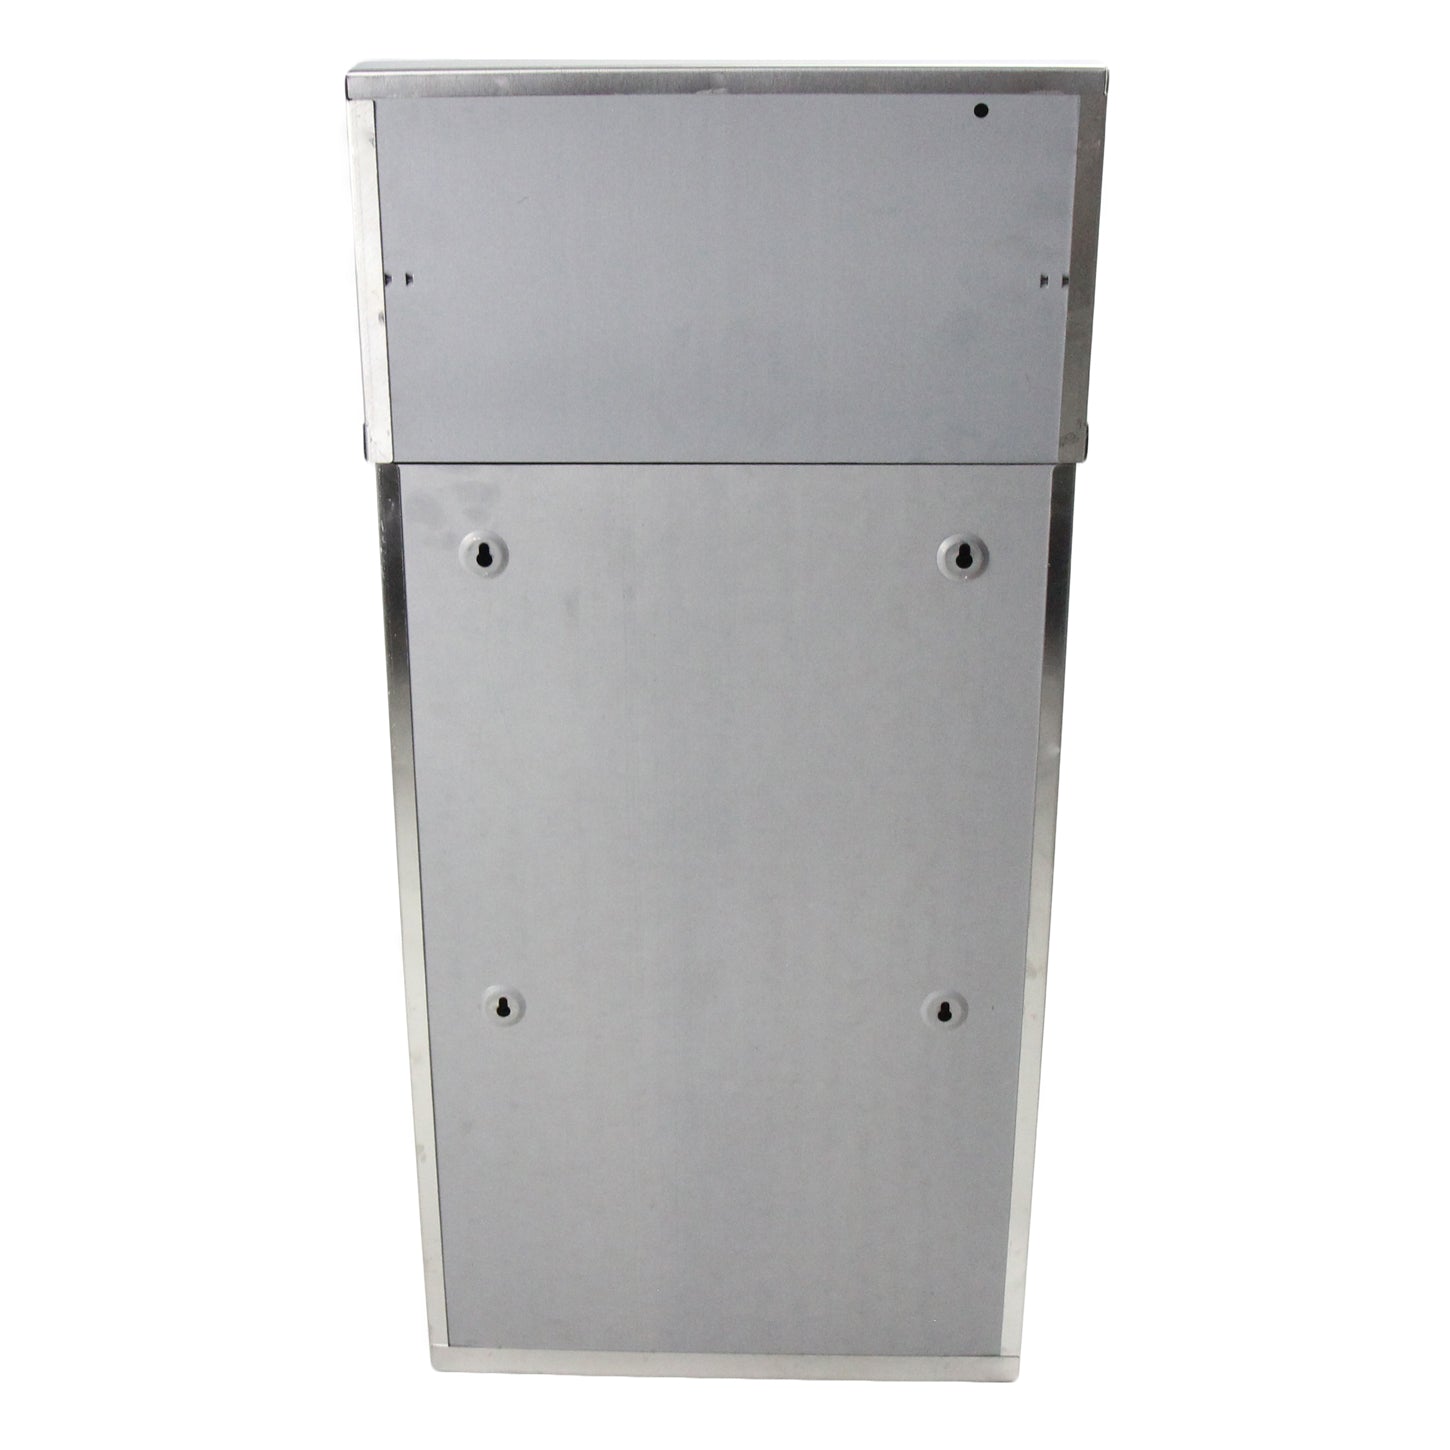 Frost Stainless Steel Liner Waste Receptacle Back View